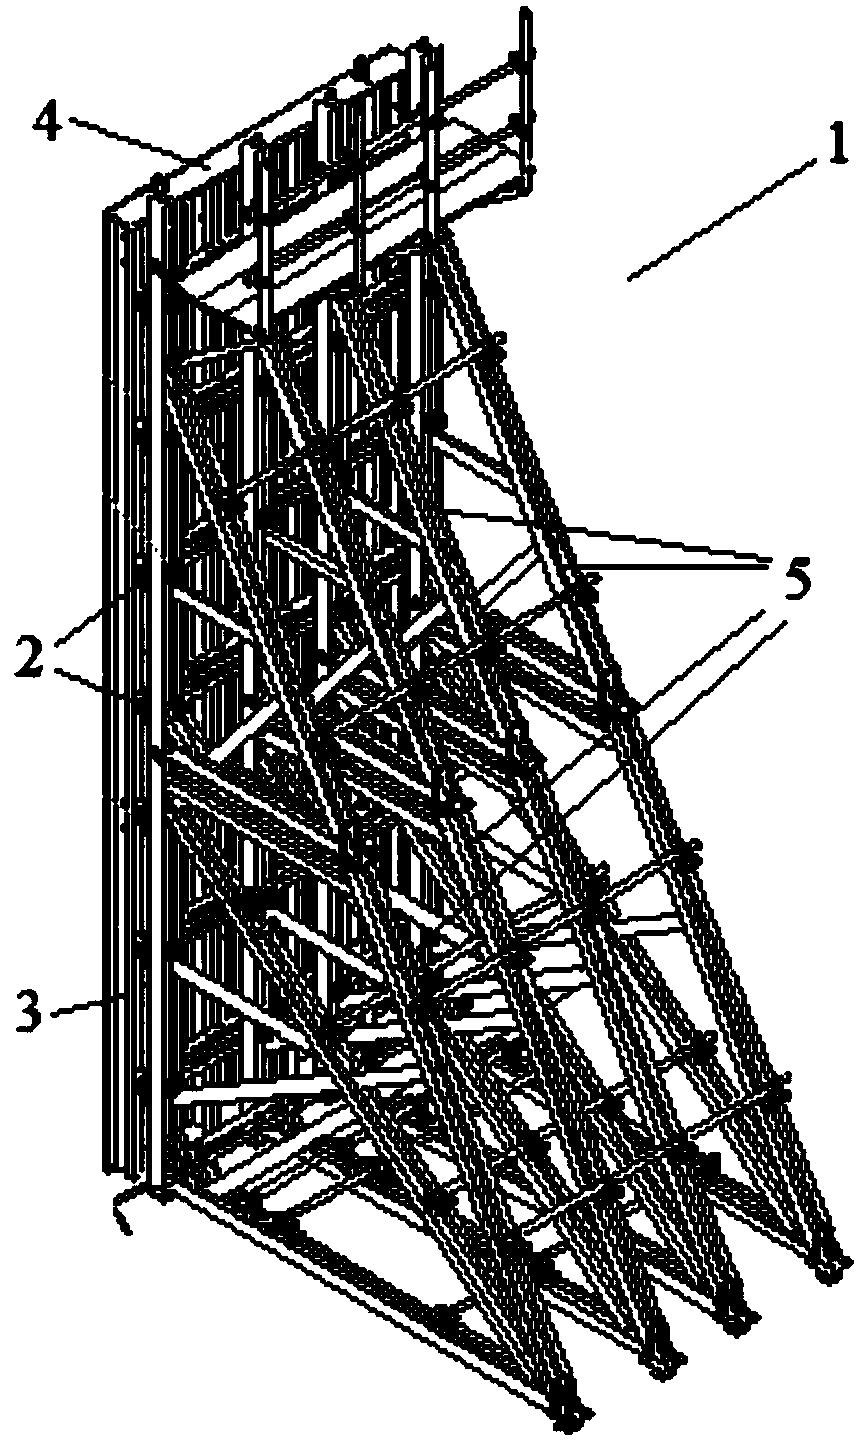 A construction method for single side wall formwork support system